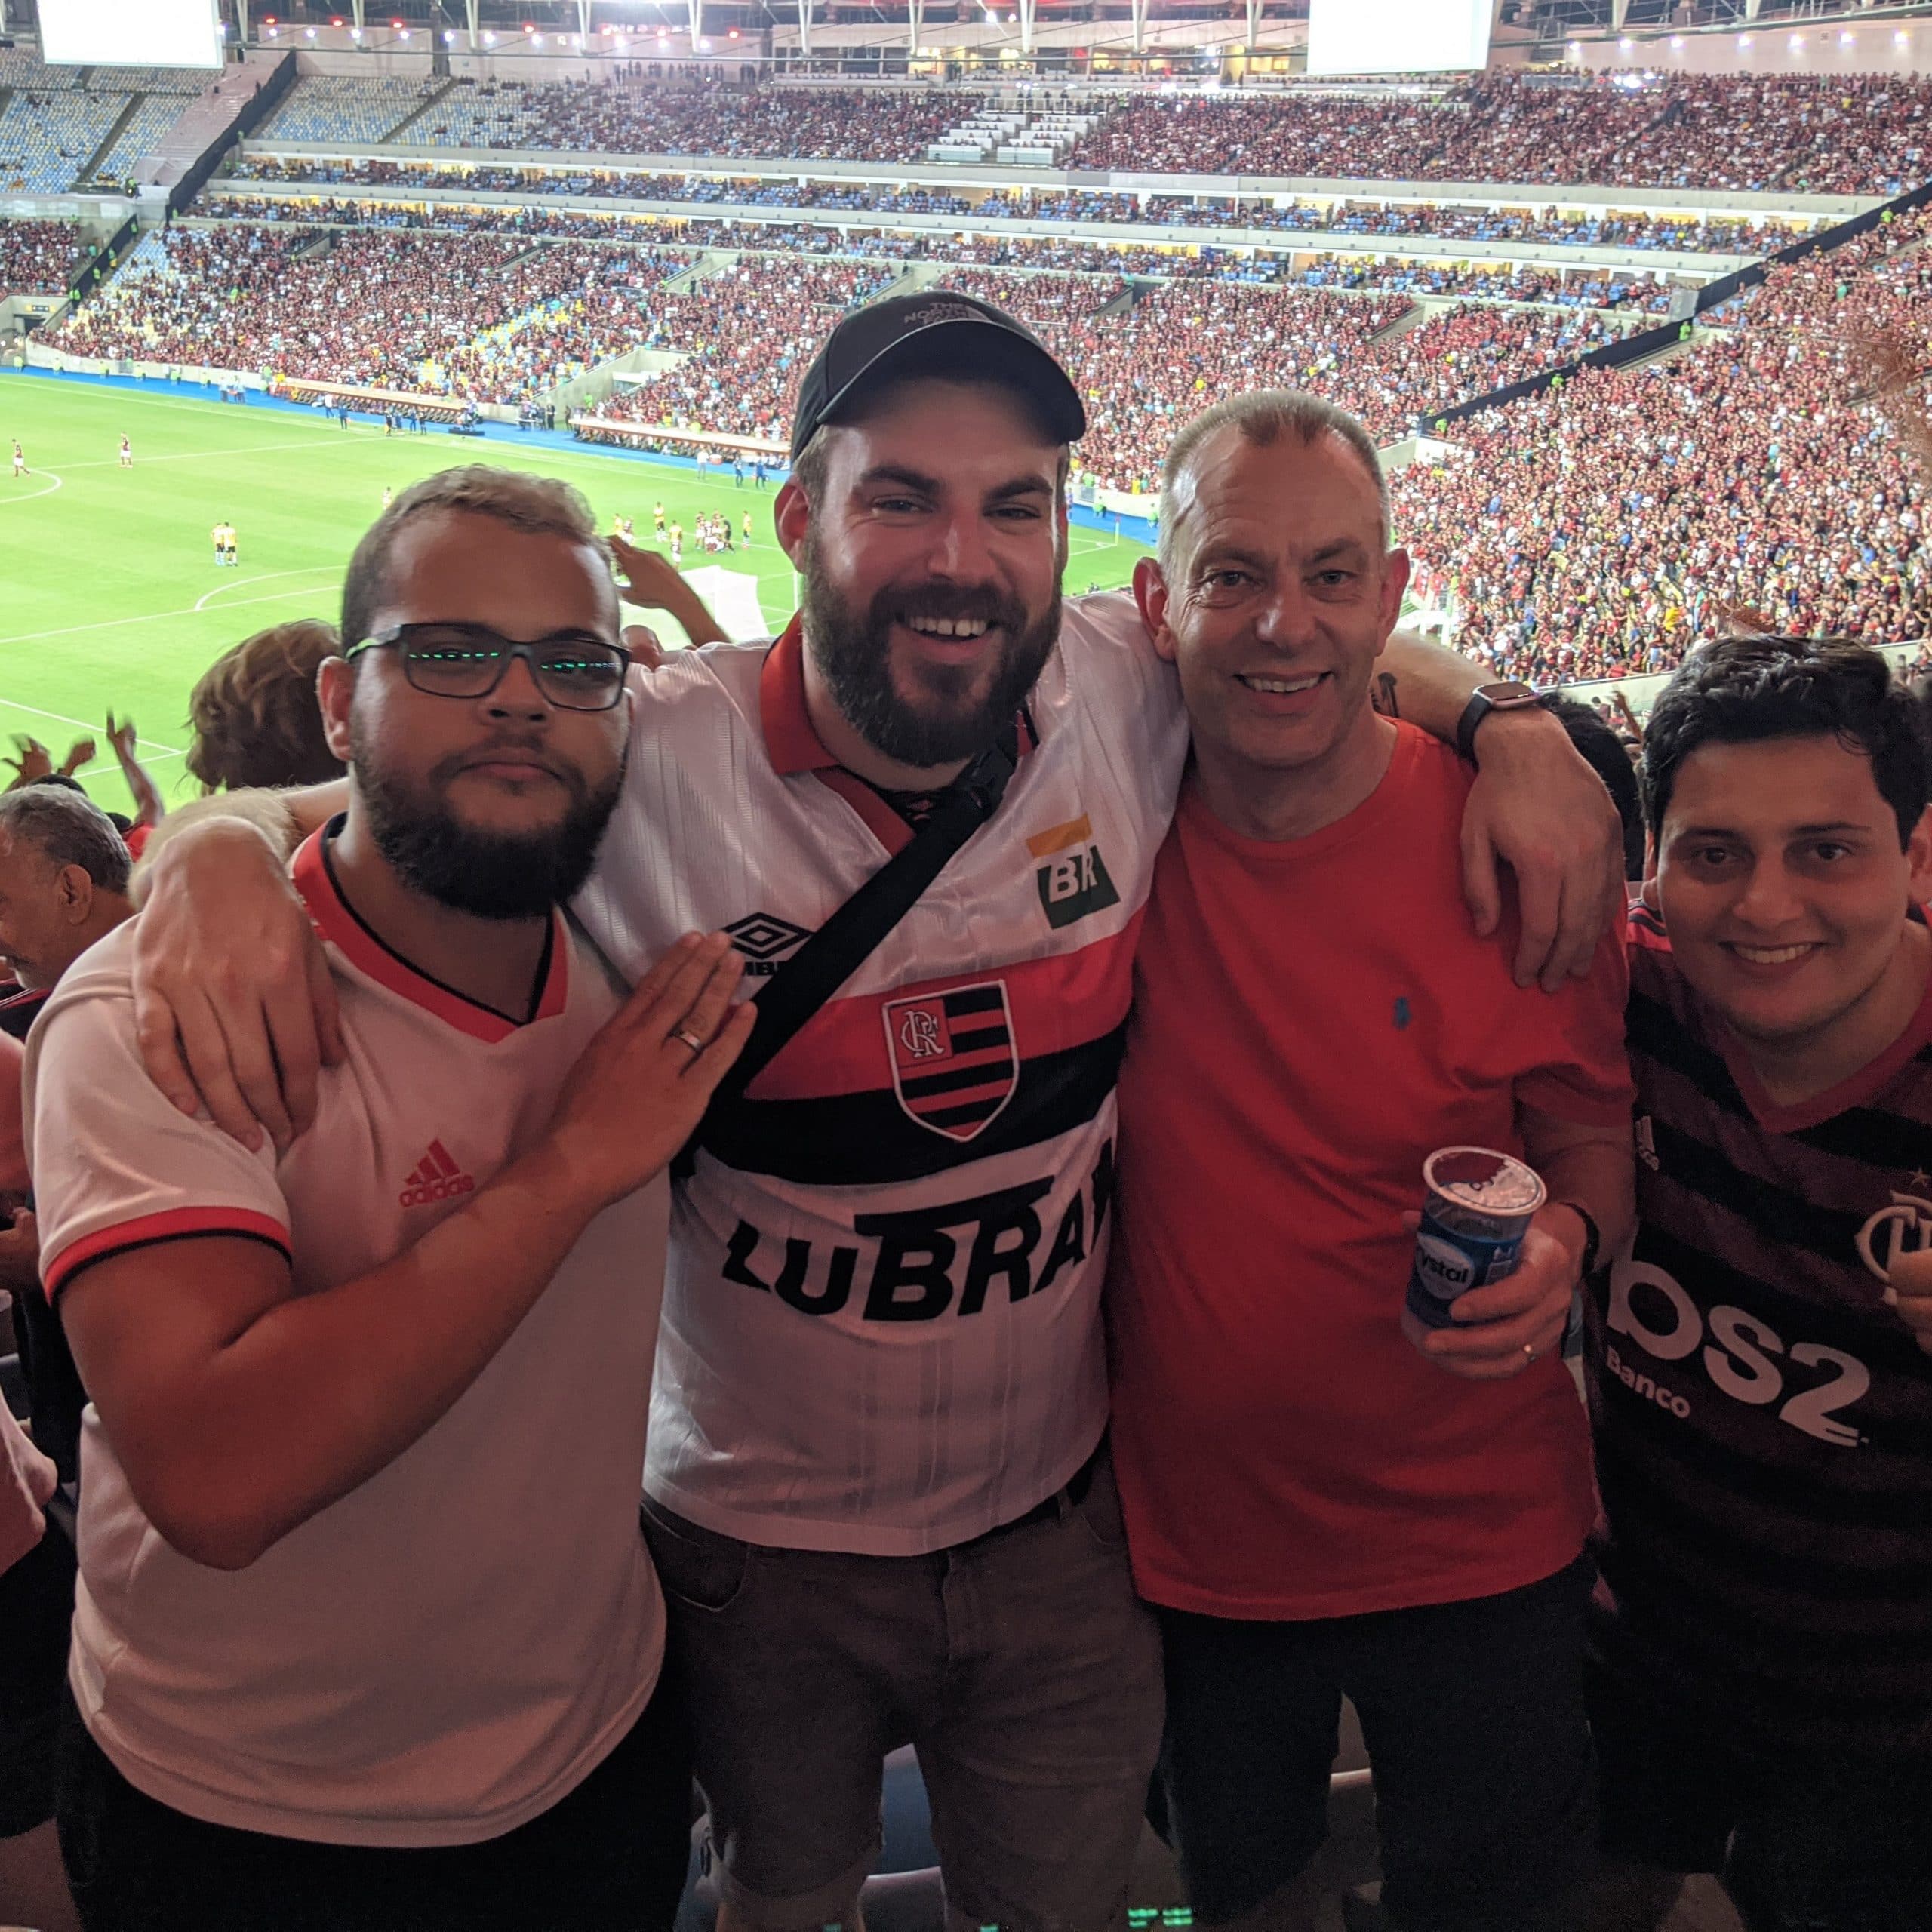 Day 7 - Flamengo Matchday Experience (Or Similar)